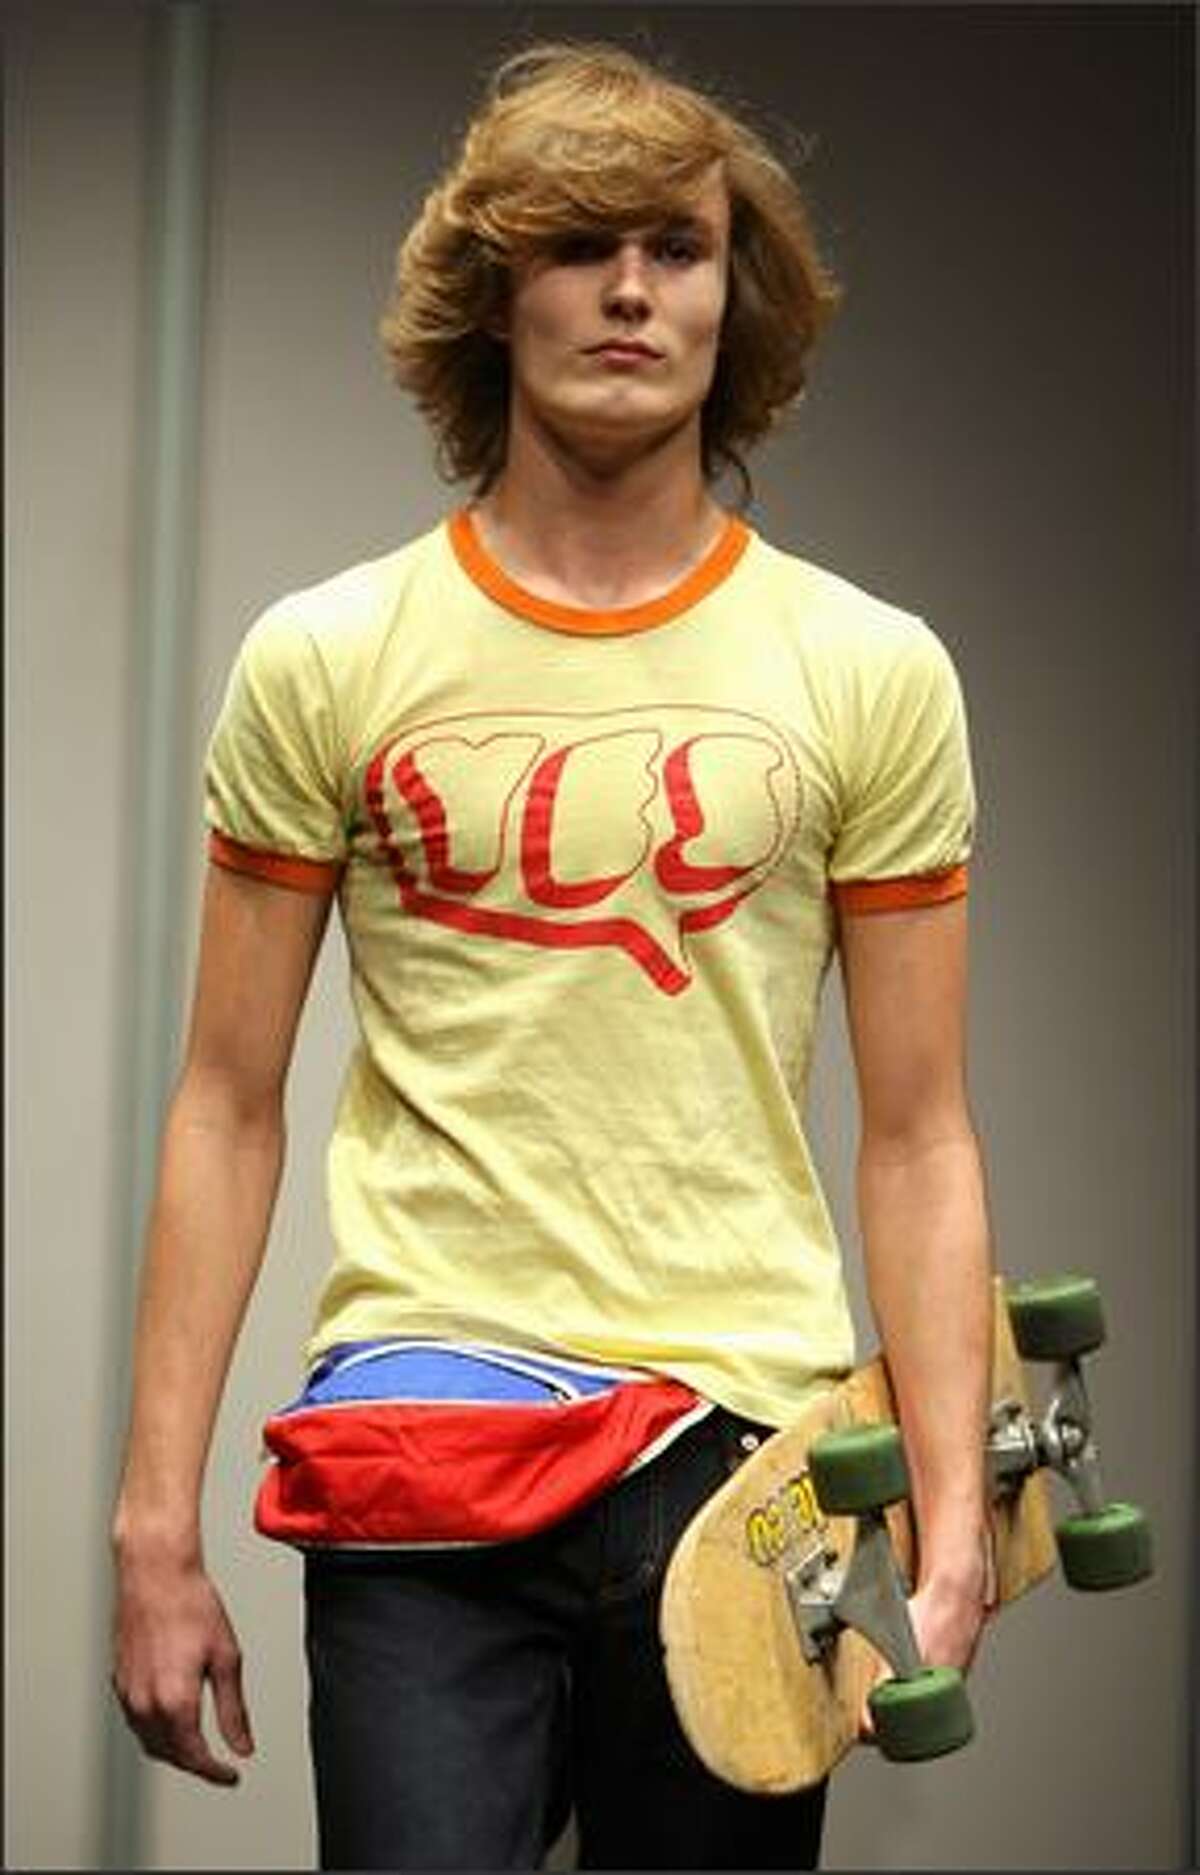 A models displays a vintage "Yes" T-shirt during a show featuring Rock and Pop memorabilia at Christie's auction house in New York, Friday. Christie's will hold an auction of 292 lots of Rock and Pop Memorabilia on 30 November 2007, ranging from vintage T-shirts, autographed pictures, original music scores to musical instruments and Gold and Platinum albums.